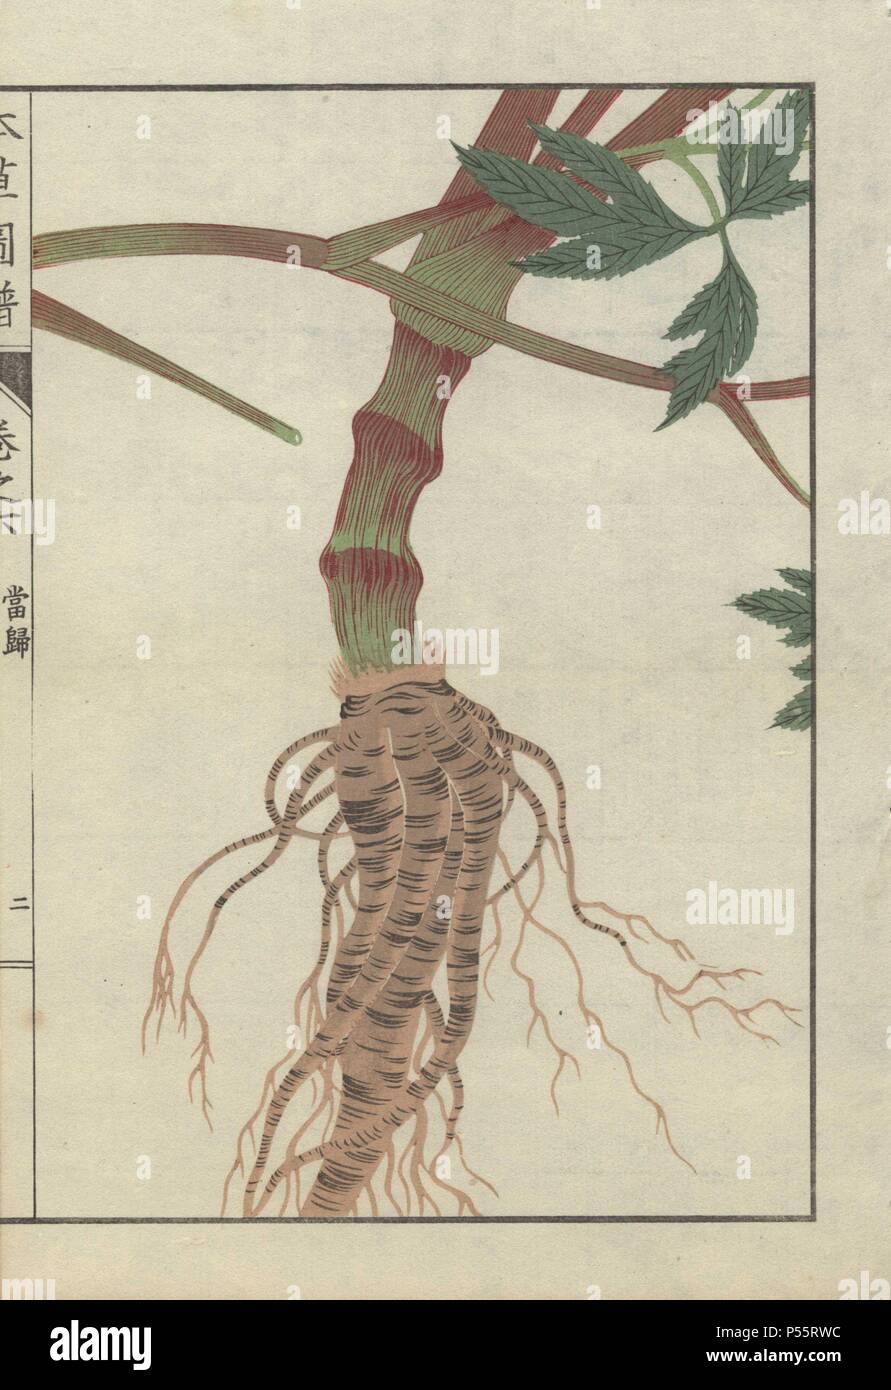 Large brown root and thick striped stem of licorice root. Ligusticum acutilobum. Touki.. Colour-printed woodblock engraving by Kan'en Iwasaki from 'Honzo Zufu,' an Illustrated Guide to Medicinal Plants, 1884. Iwasaki (1786-1842) was a Japanese botanist, entomologist and zoologist. He was one of the first Japanese botanists to incorporate western knowledge into his studies. Stock Photo